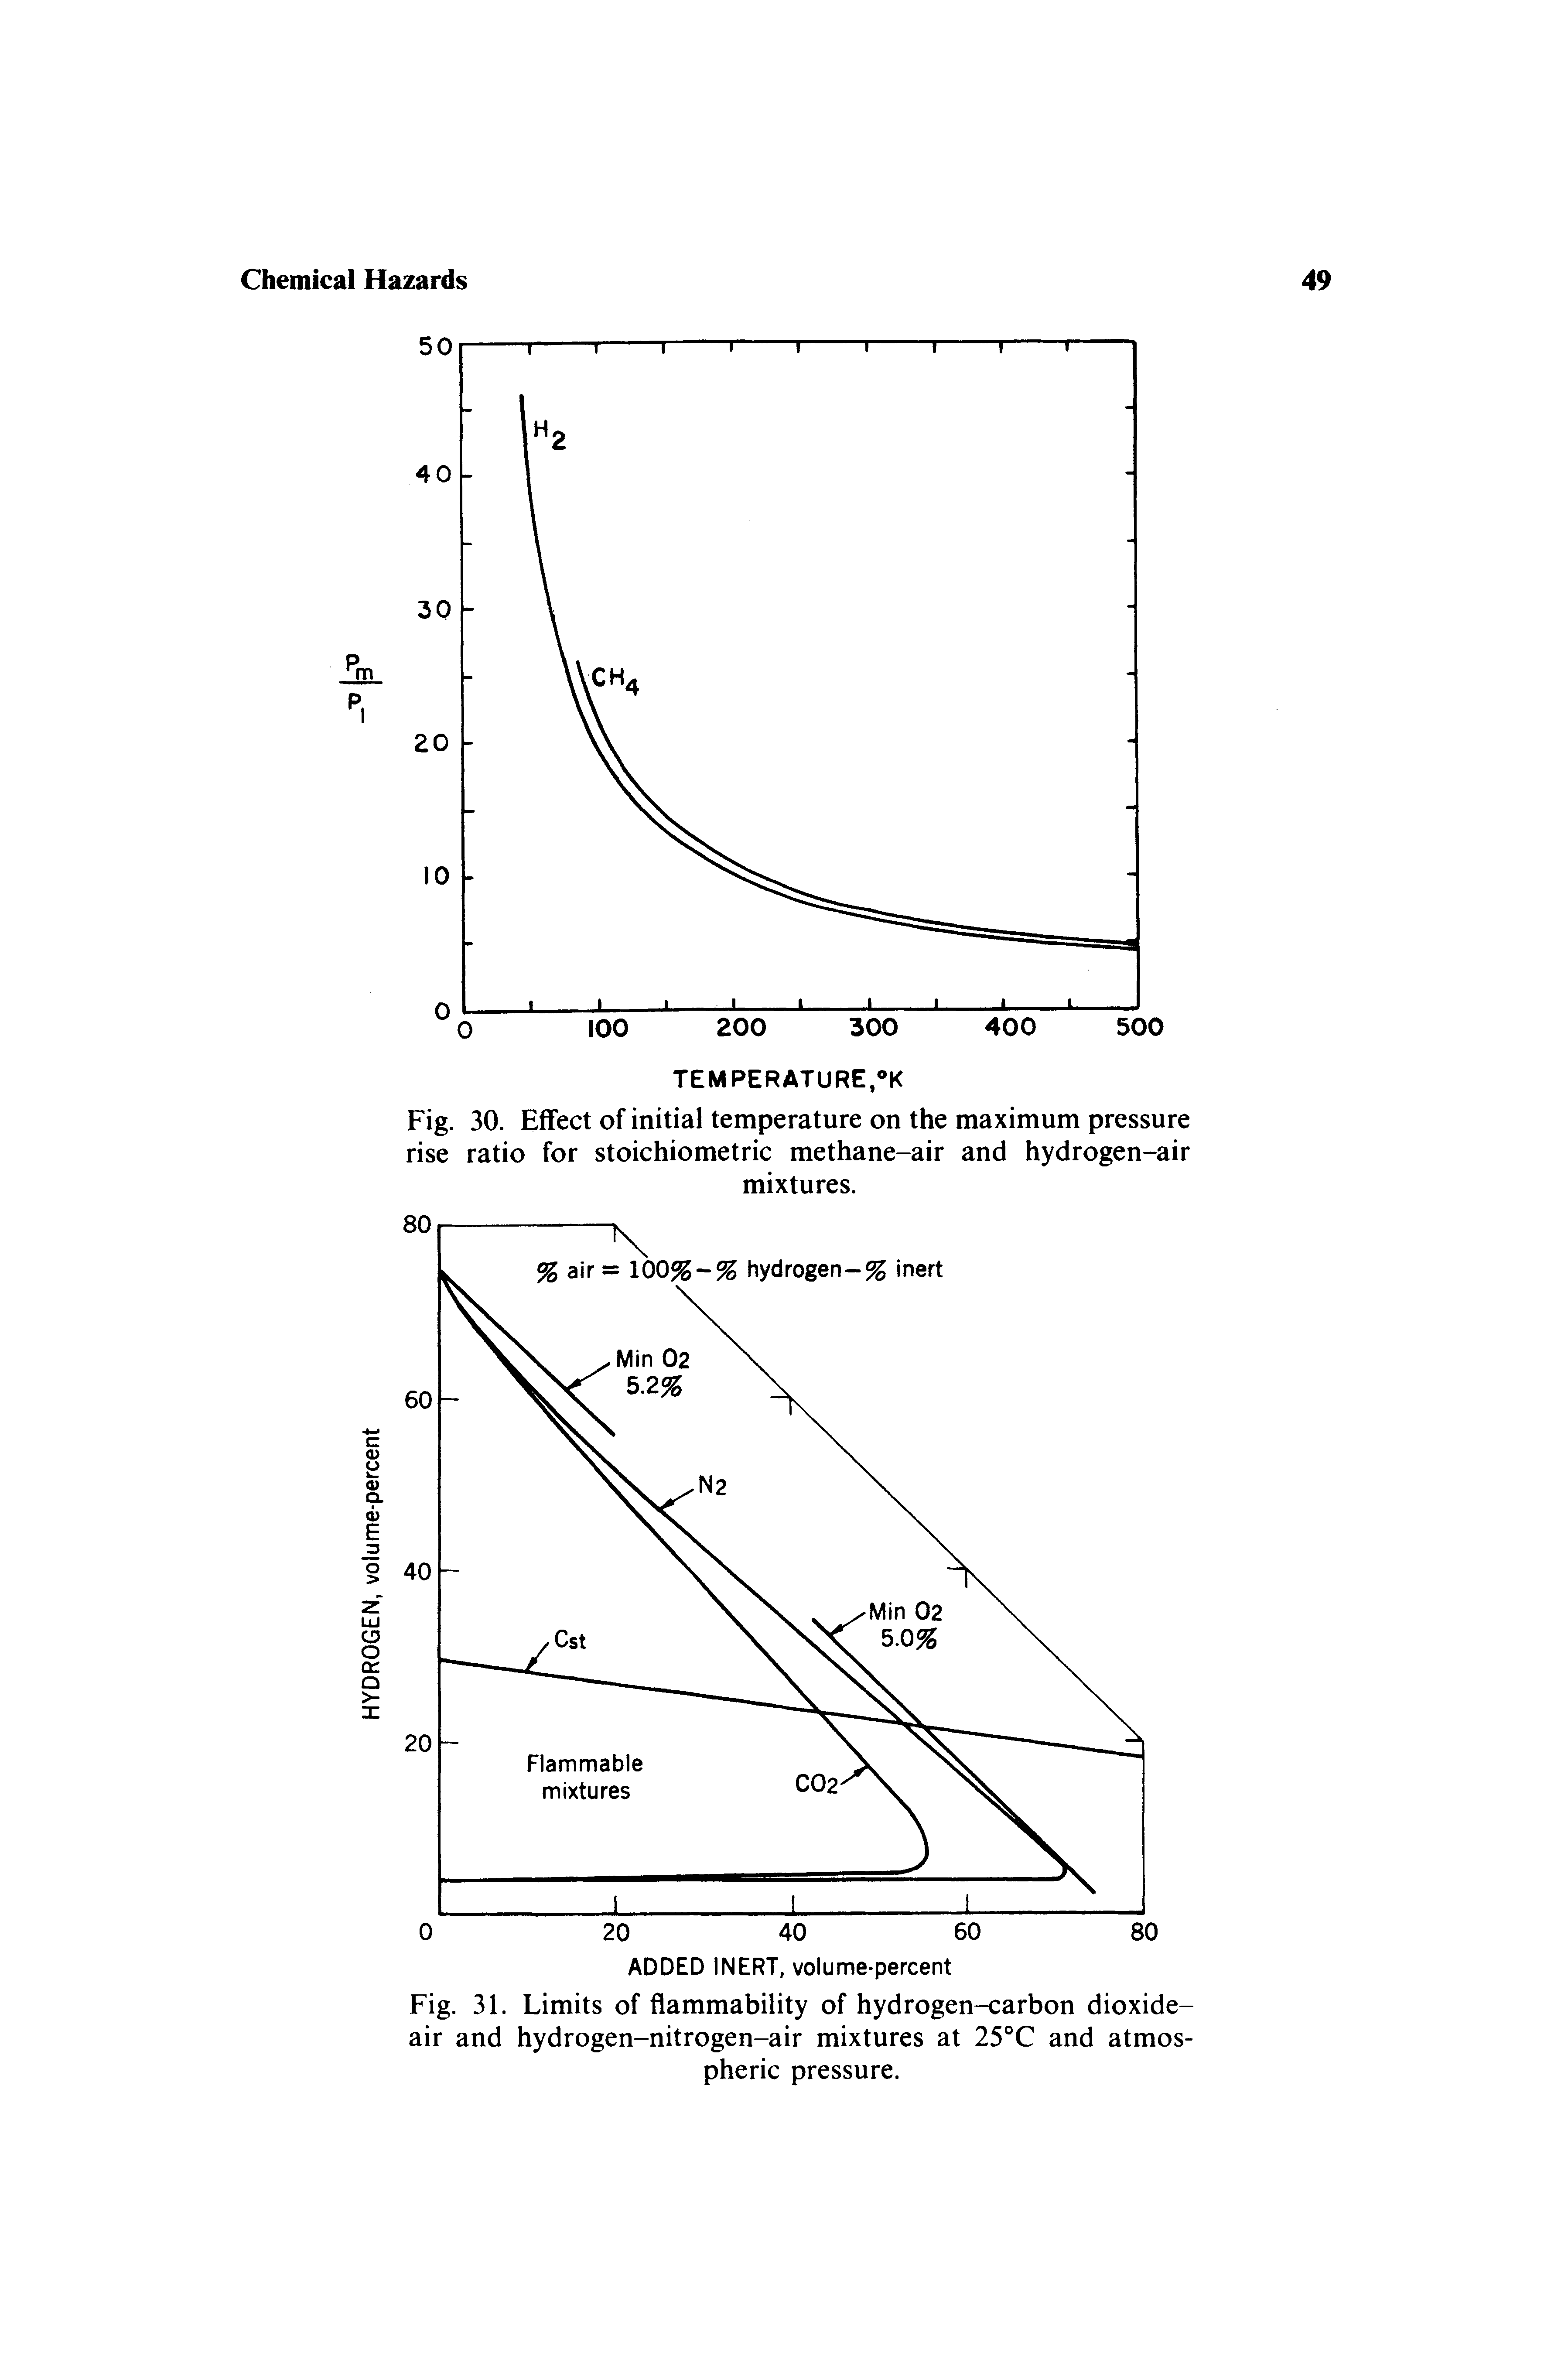 Fig. 30. Effect of initial temperature on the maximum pressure rise ratio for stoichiometric methane-air and hydrogen-air mixtures.